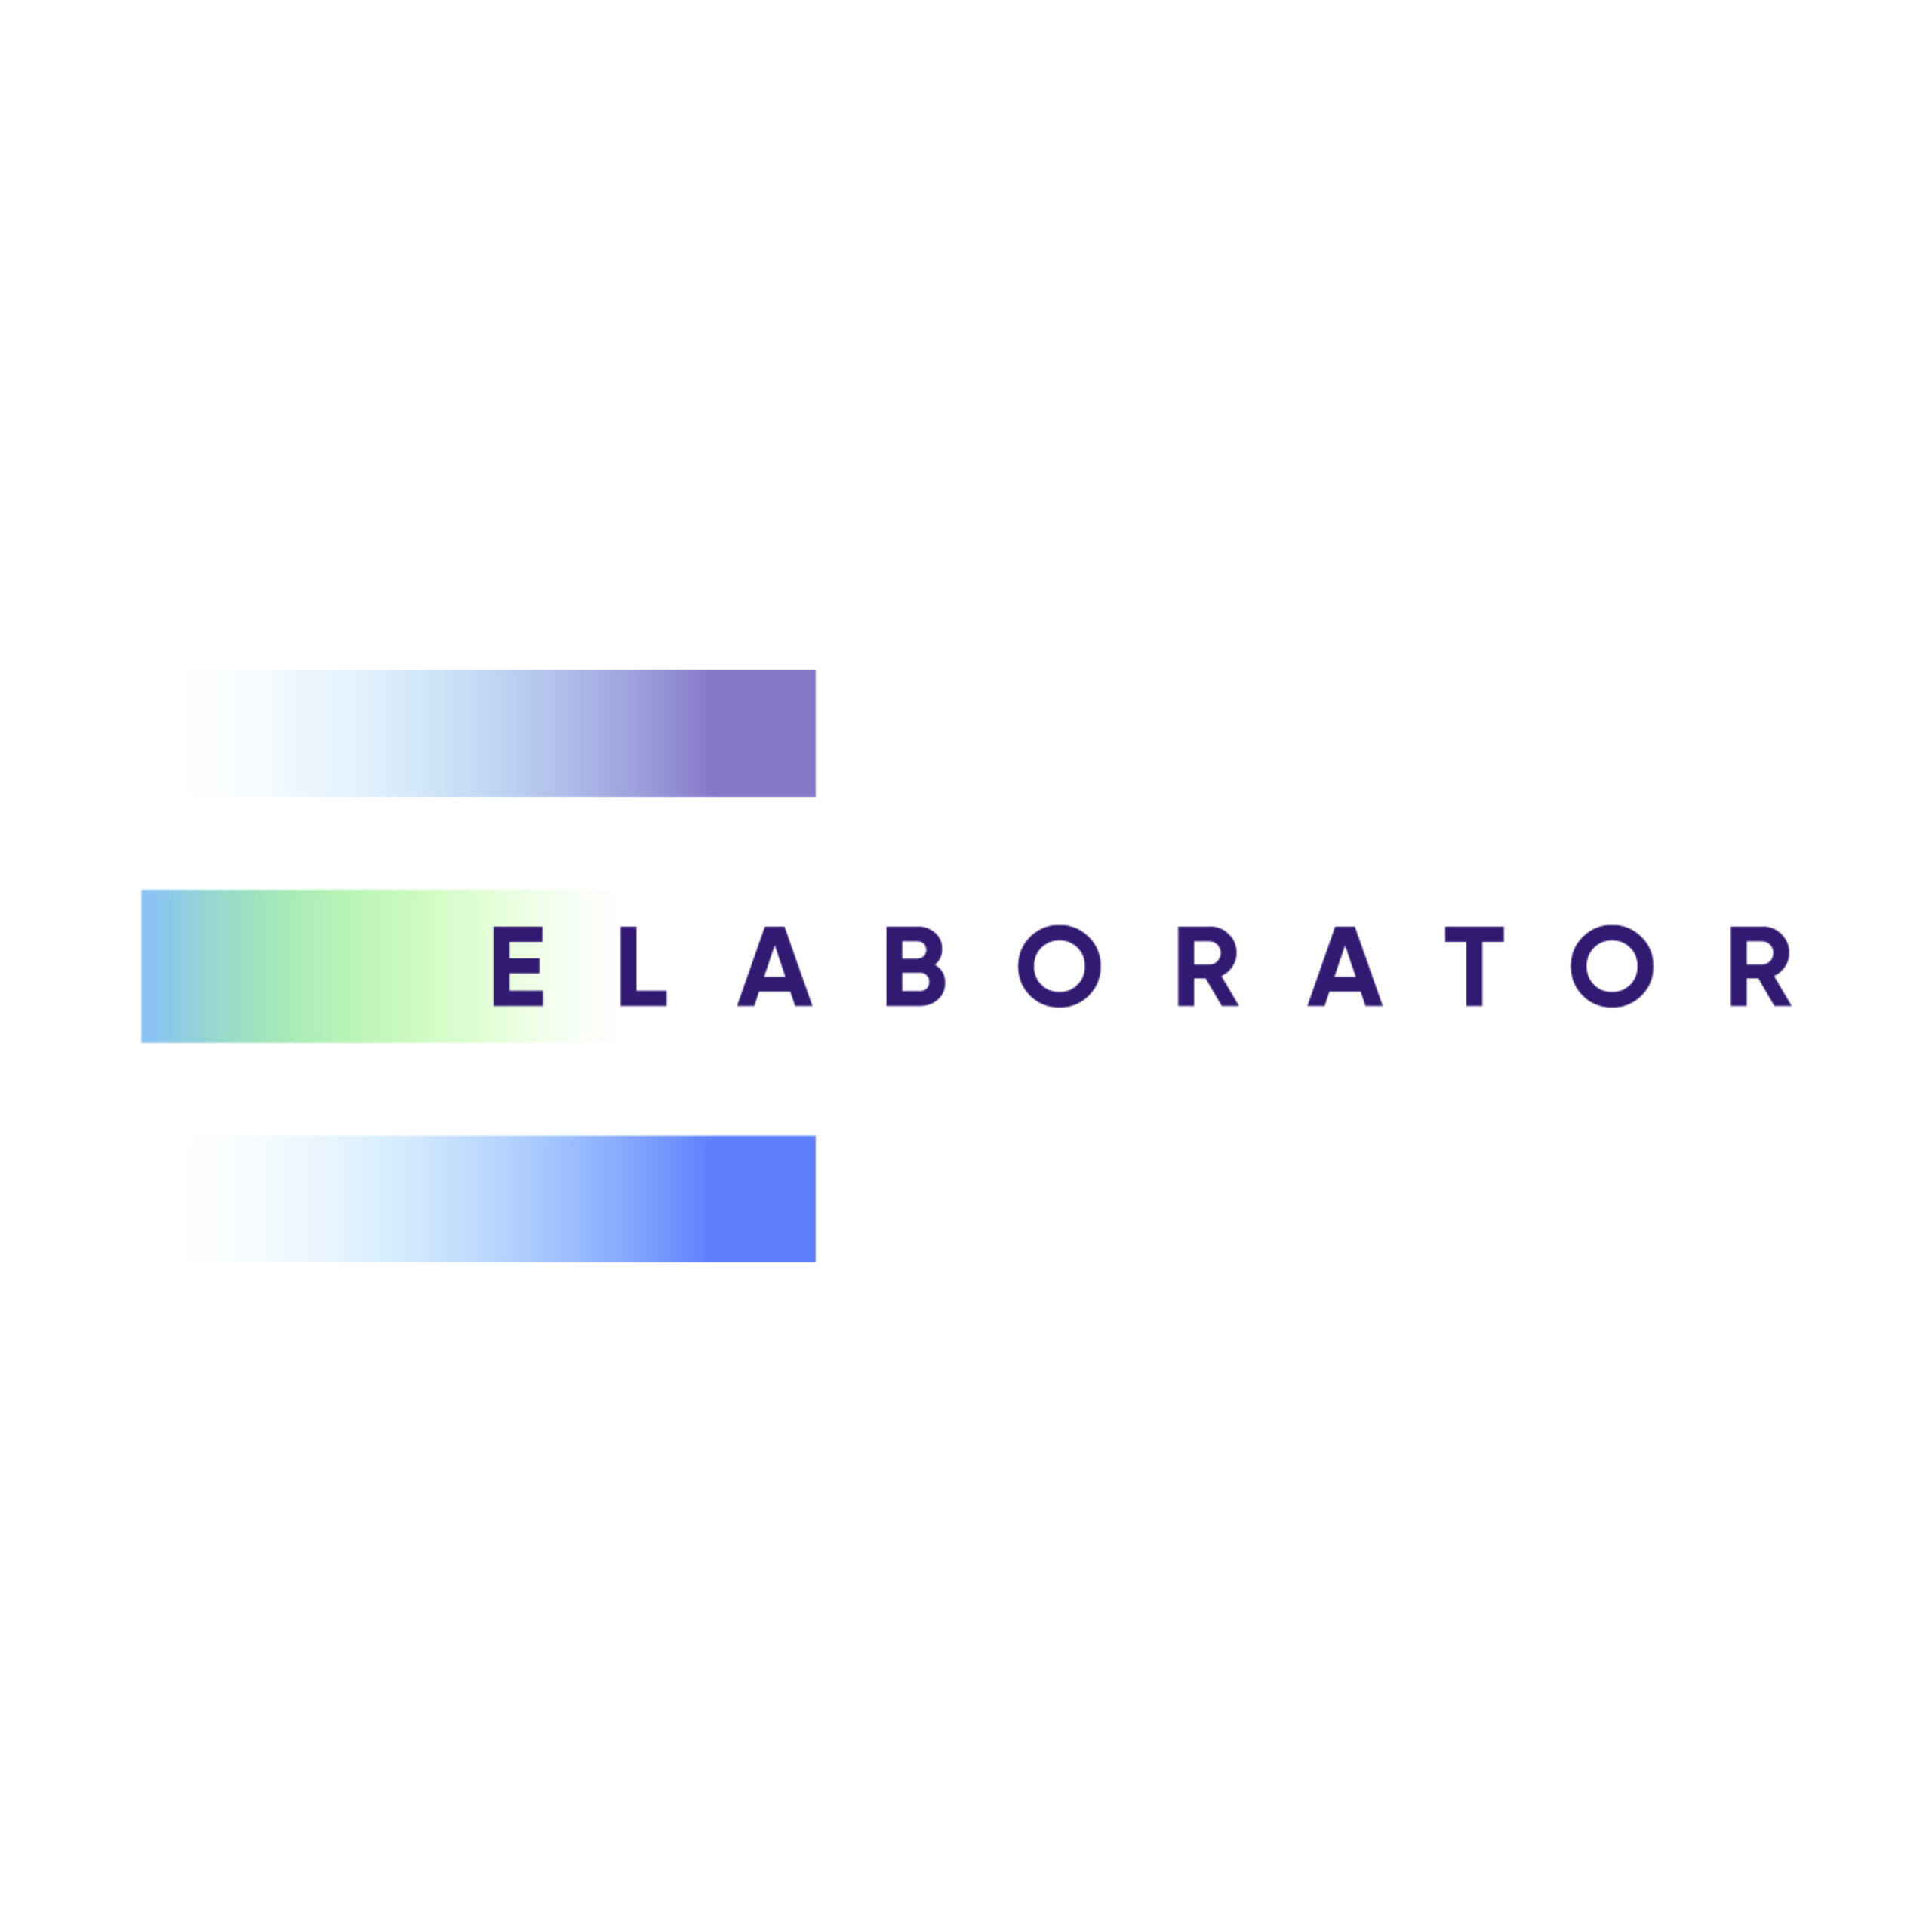 Read more about the article ELABORATOR